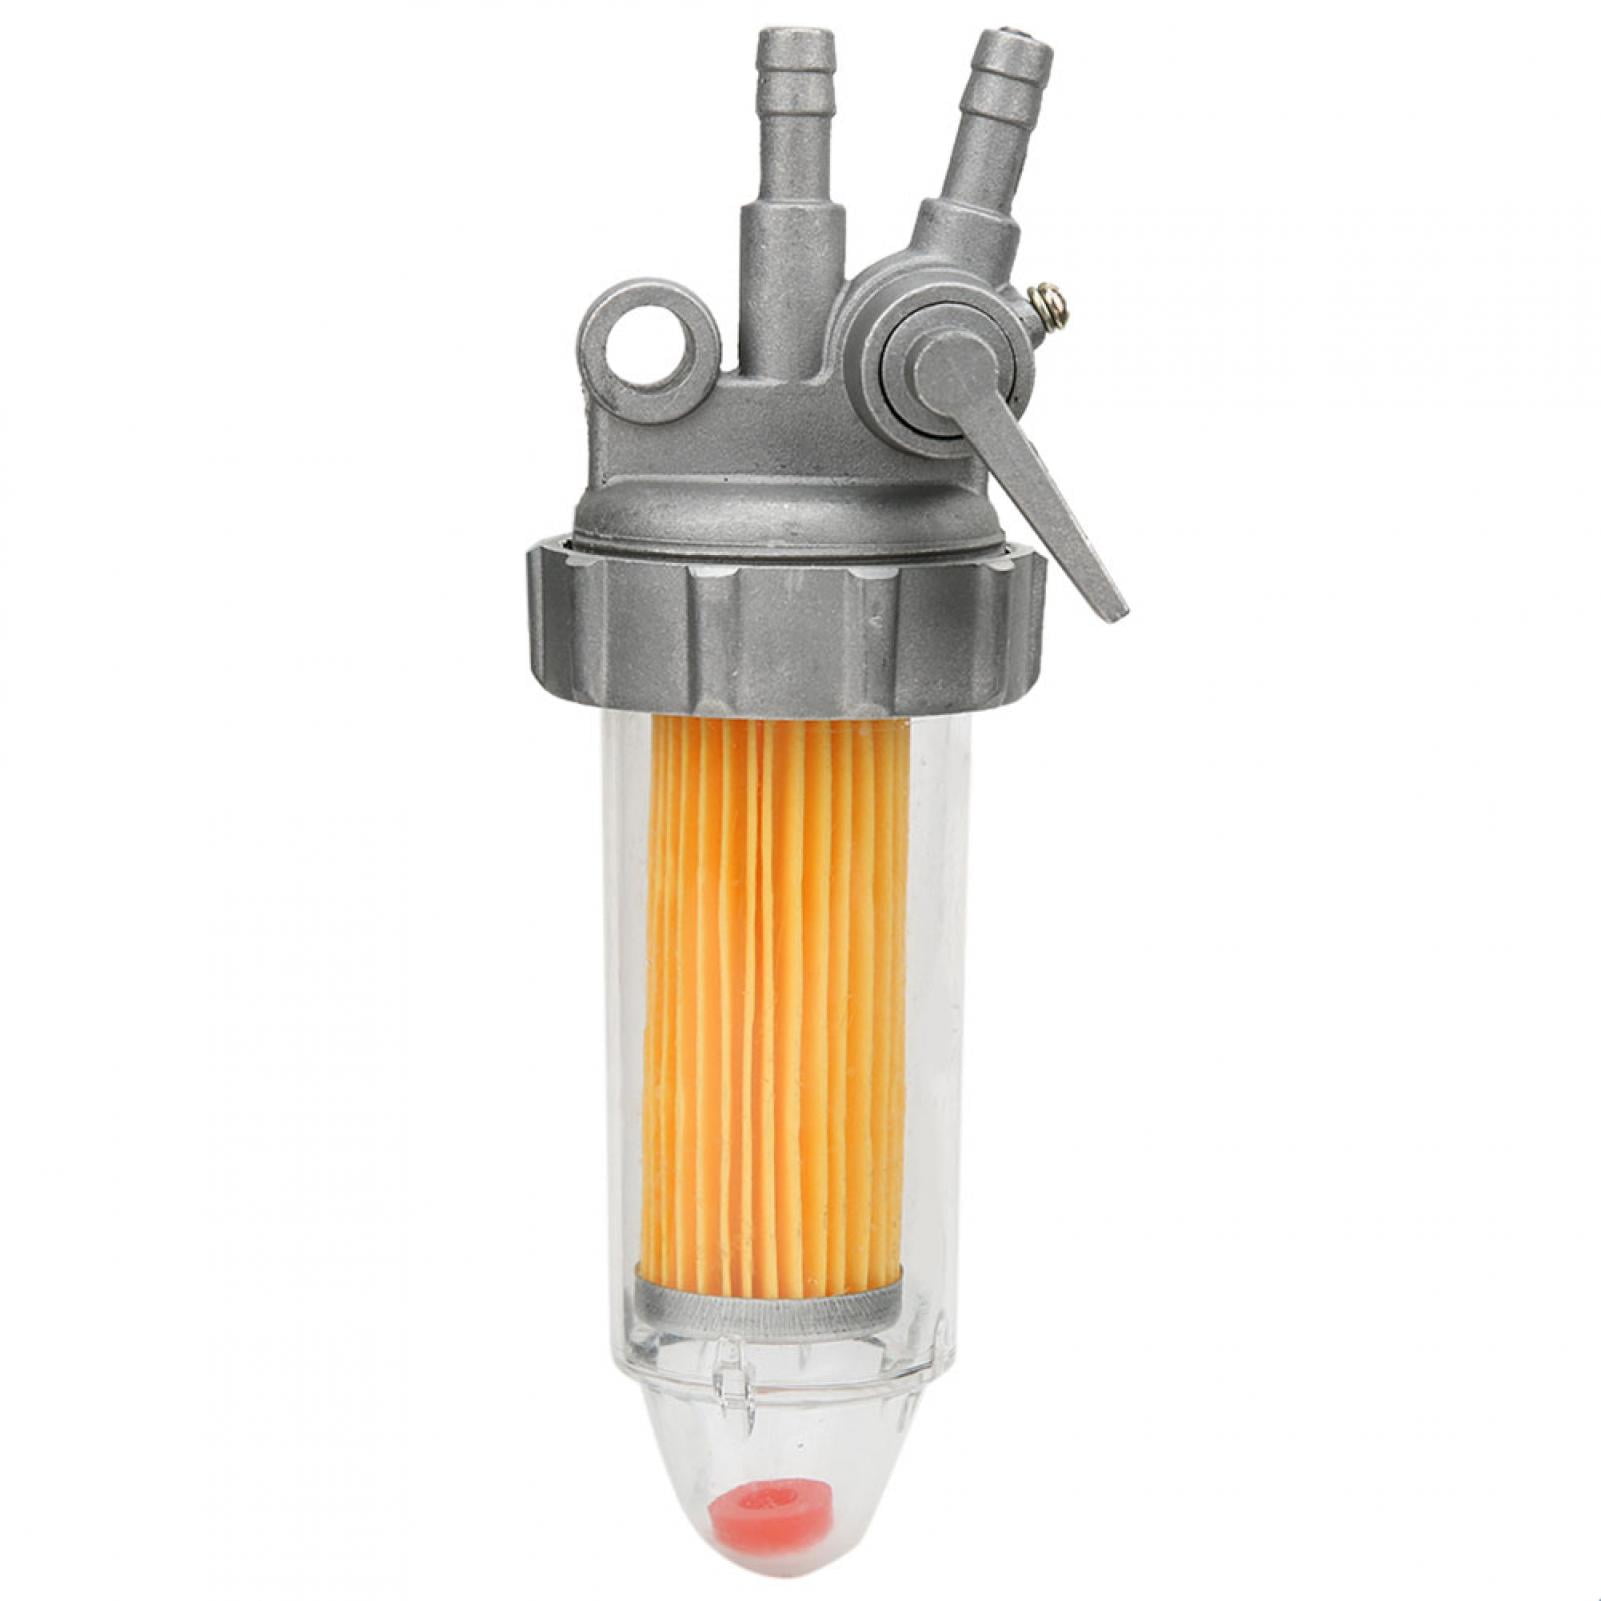 Diesel Generator Filter Grey Used for Obstruct External Substance Entering The Engine Fuel Filter ABS Material Suitable for Diesel Generator 186FA 178FA 186F 5KW Yellow 